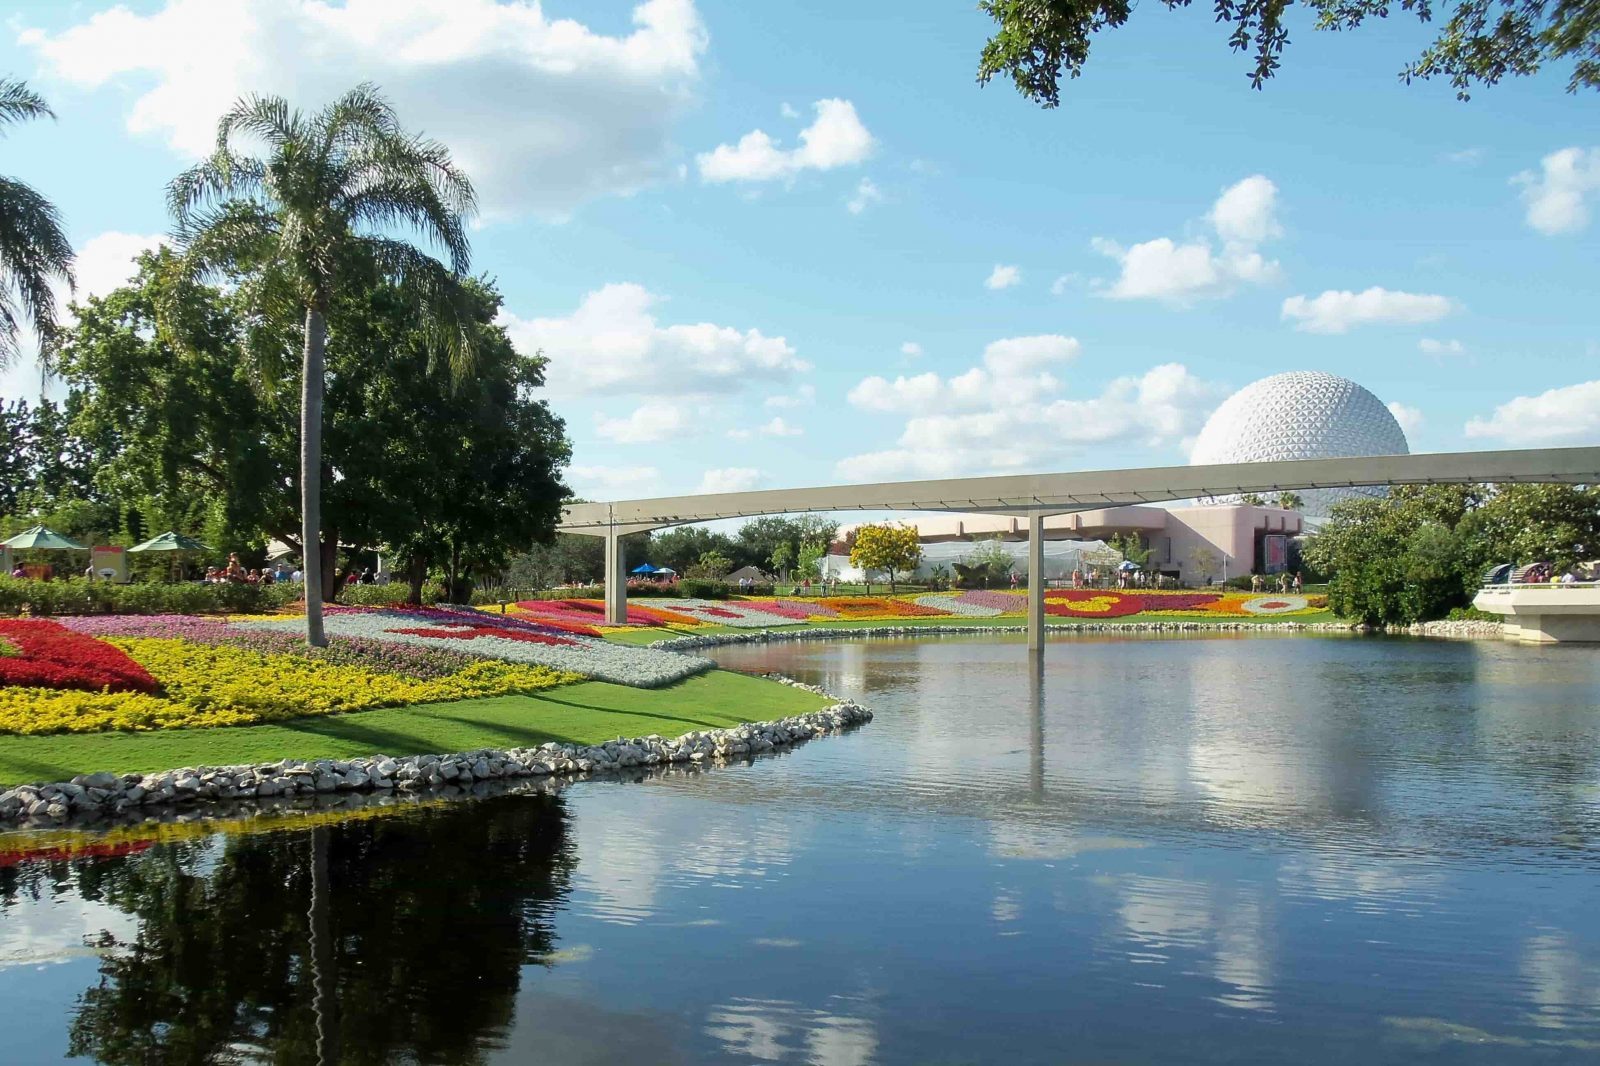 Epcot Center flowers, water, monorail and spaceship earth globe